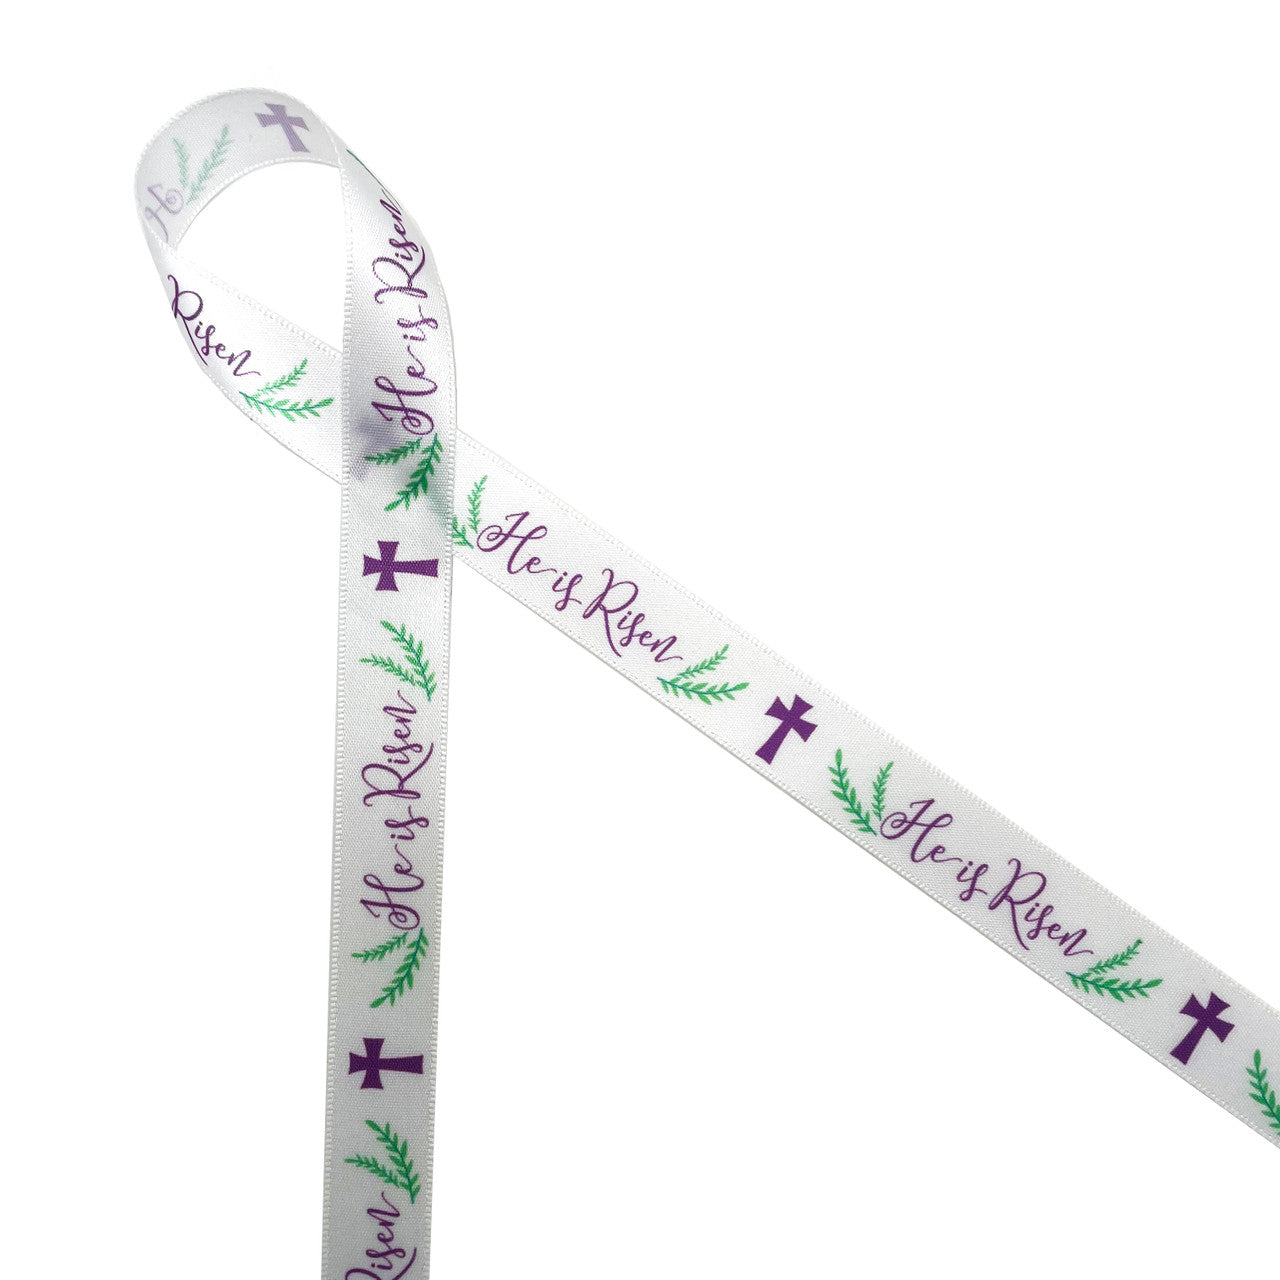 Easter He is Risen ribbon is the Christian expression of the Easter season. Our He is Risen ribbon in purple and green is printed on 5/8" white single face satin ribbon. This is the ideal ribbon for Easter Sunday services, Christian Easter baskets, gift wrap, table decor and crafts. Be sure to have  this ribbon on  hand for Easter Brunch and table decor! Our ribbon is designed and printed in the USA